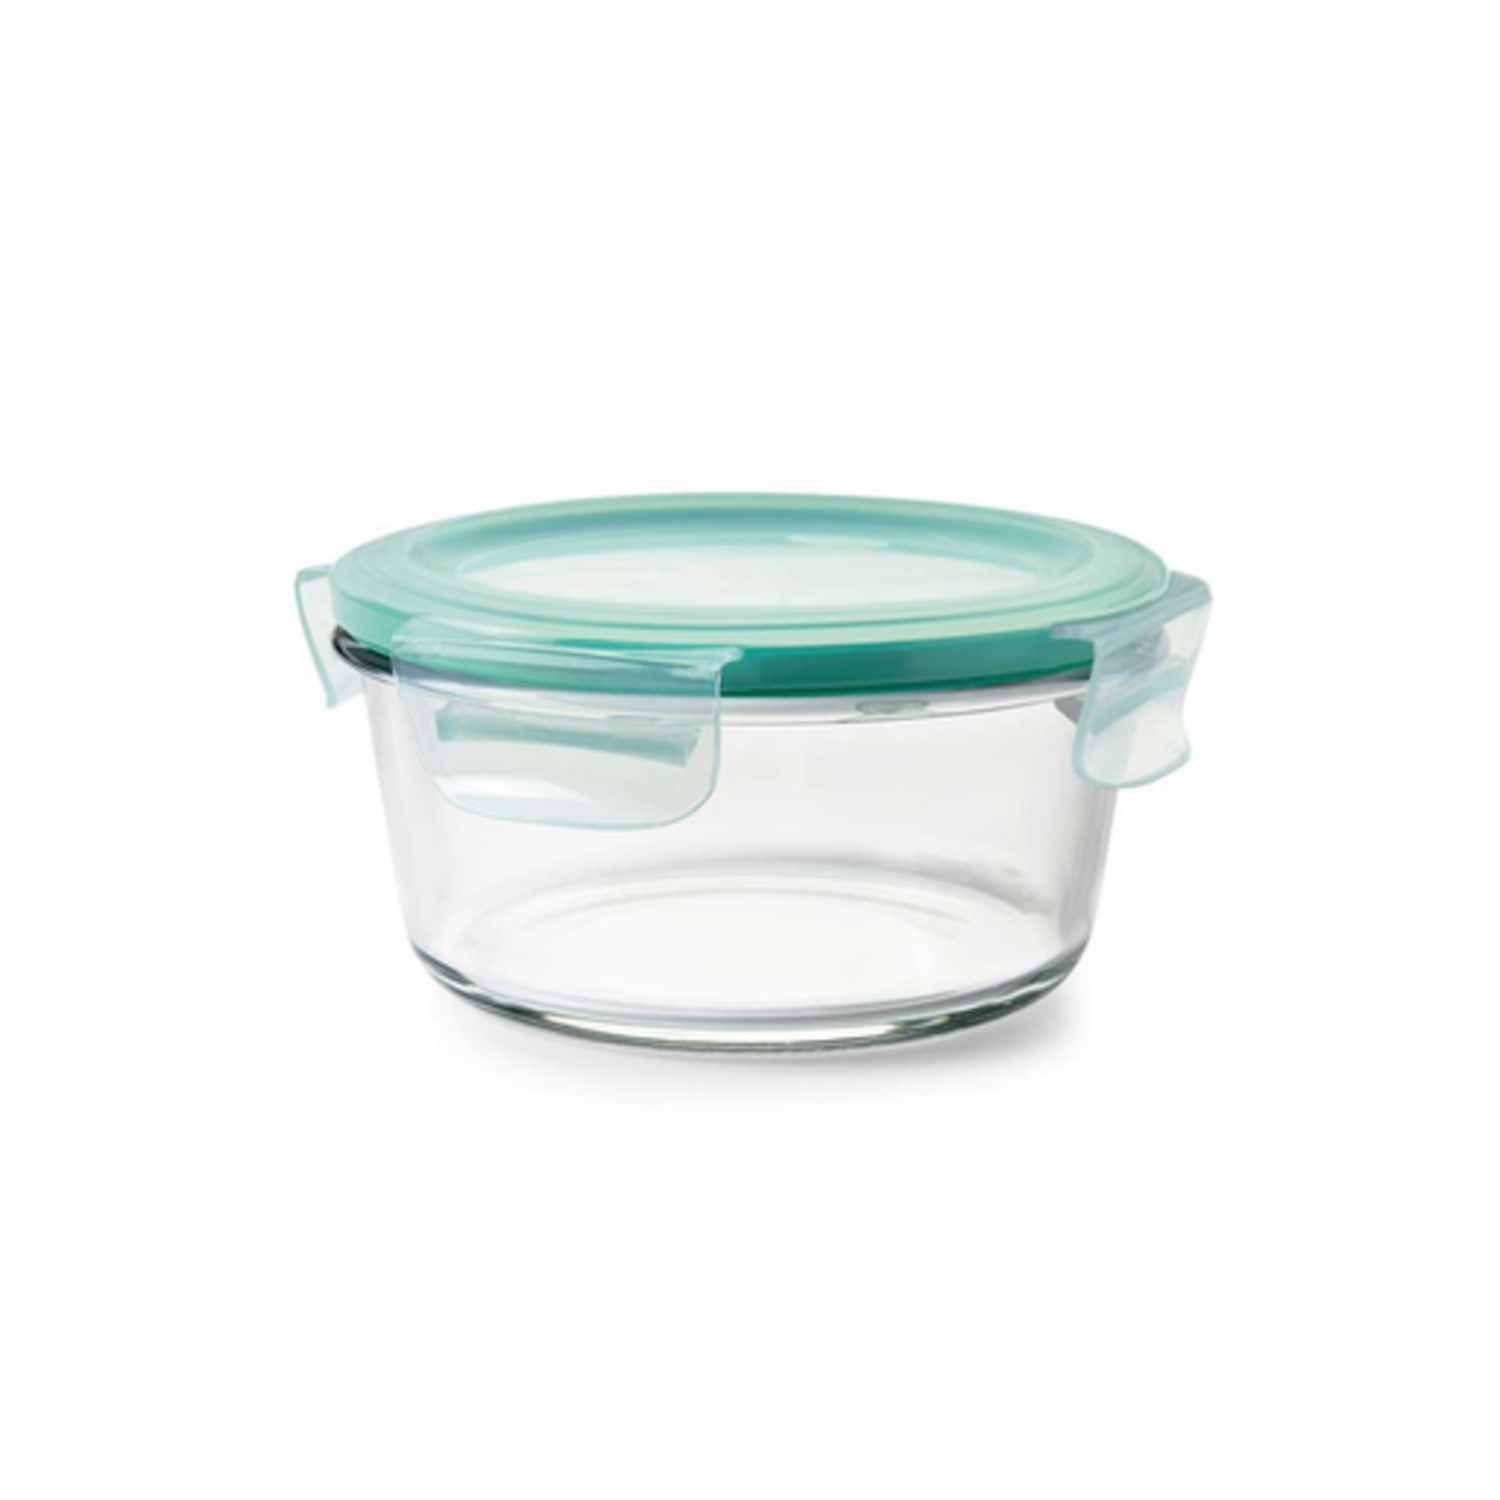 https://cdn.shoplightspeed.com/shops/633447/files/18959413/1500x4000x3/oxo-oxo-4-cup-round-glass-storage-container.jpg